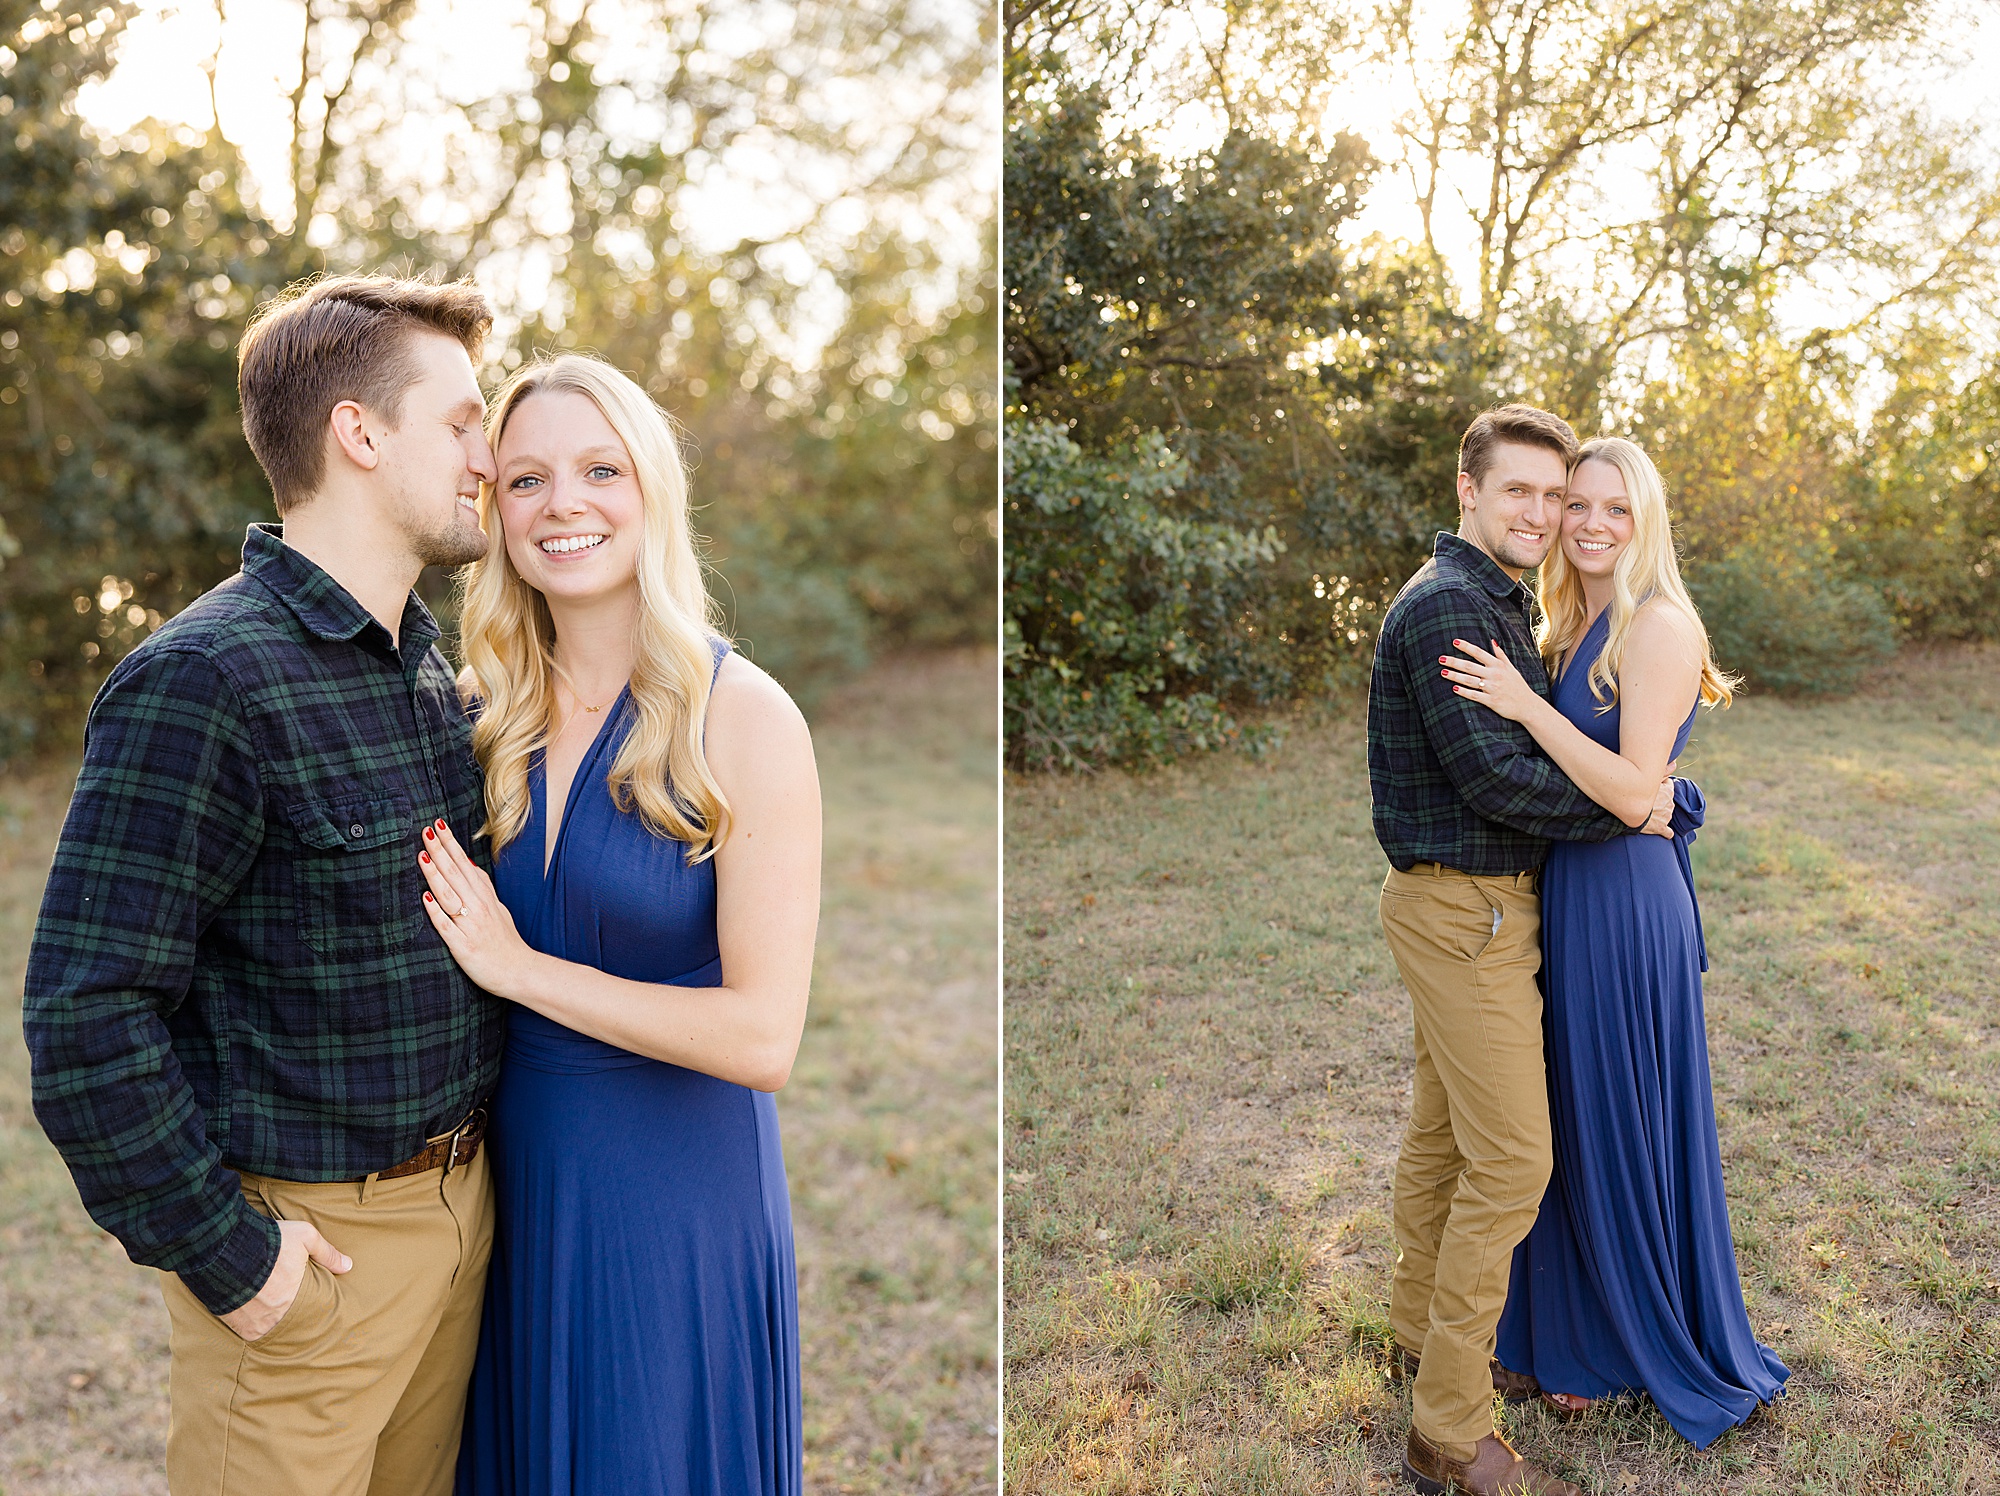 Rockledge Park engagement session in the fall